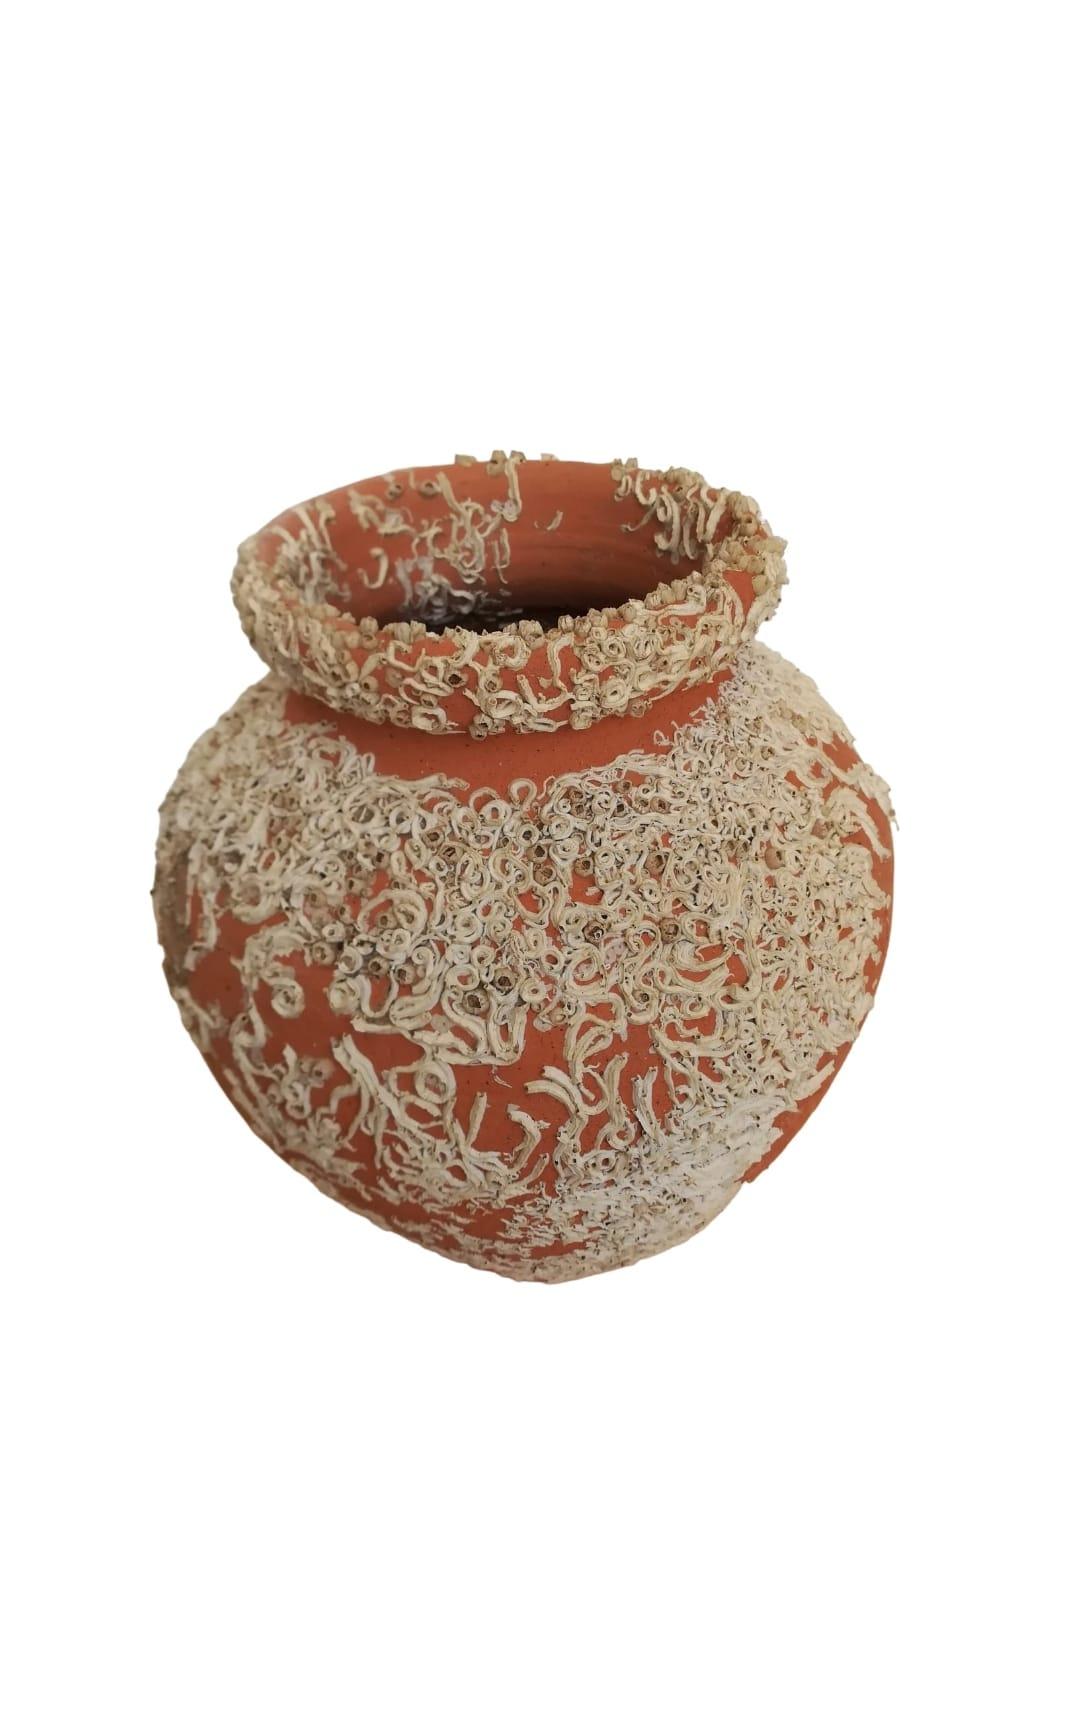 These pots  are stunning  sculptural treasures  from the sea.

An handmade terracota pot submerged under sea and used as a trap for individual octopus, a lovely pink.
Oyster shells create beautiful pearl iridescence and coral brings. 
Each pot has a